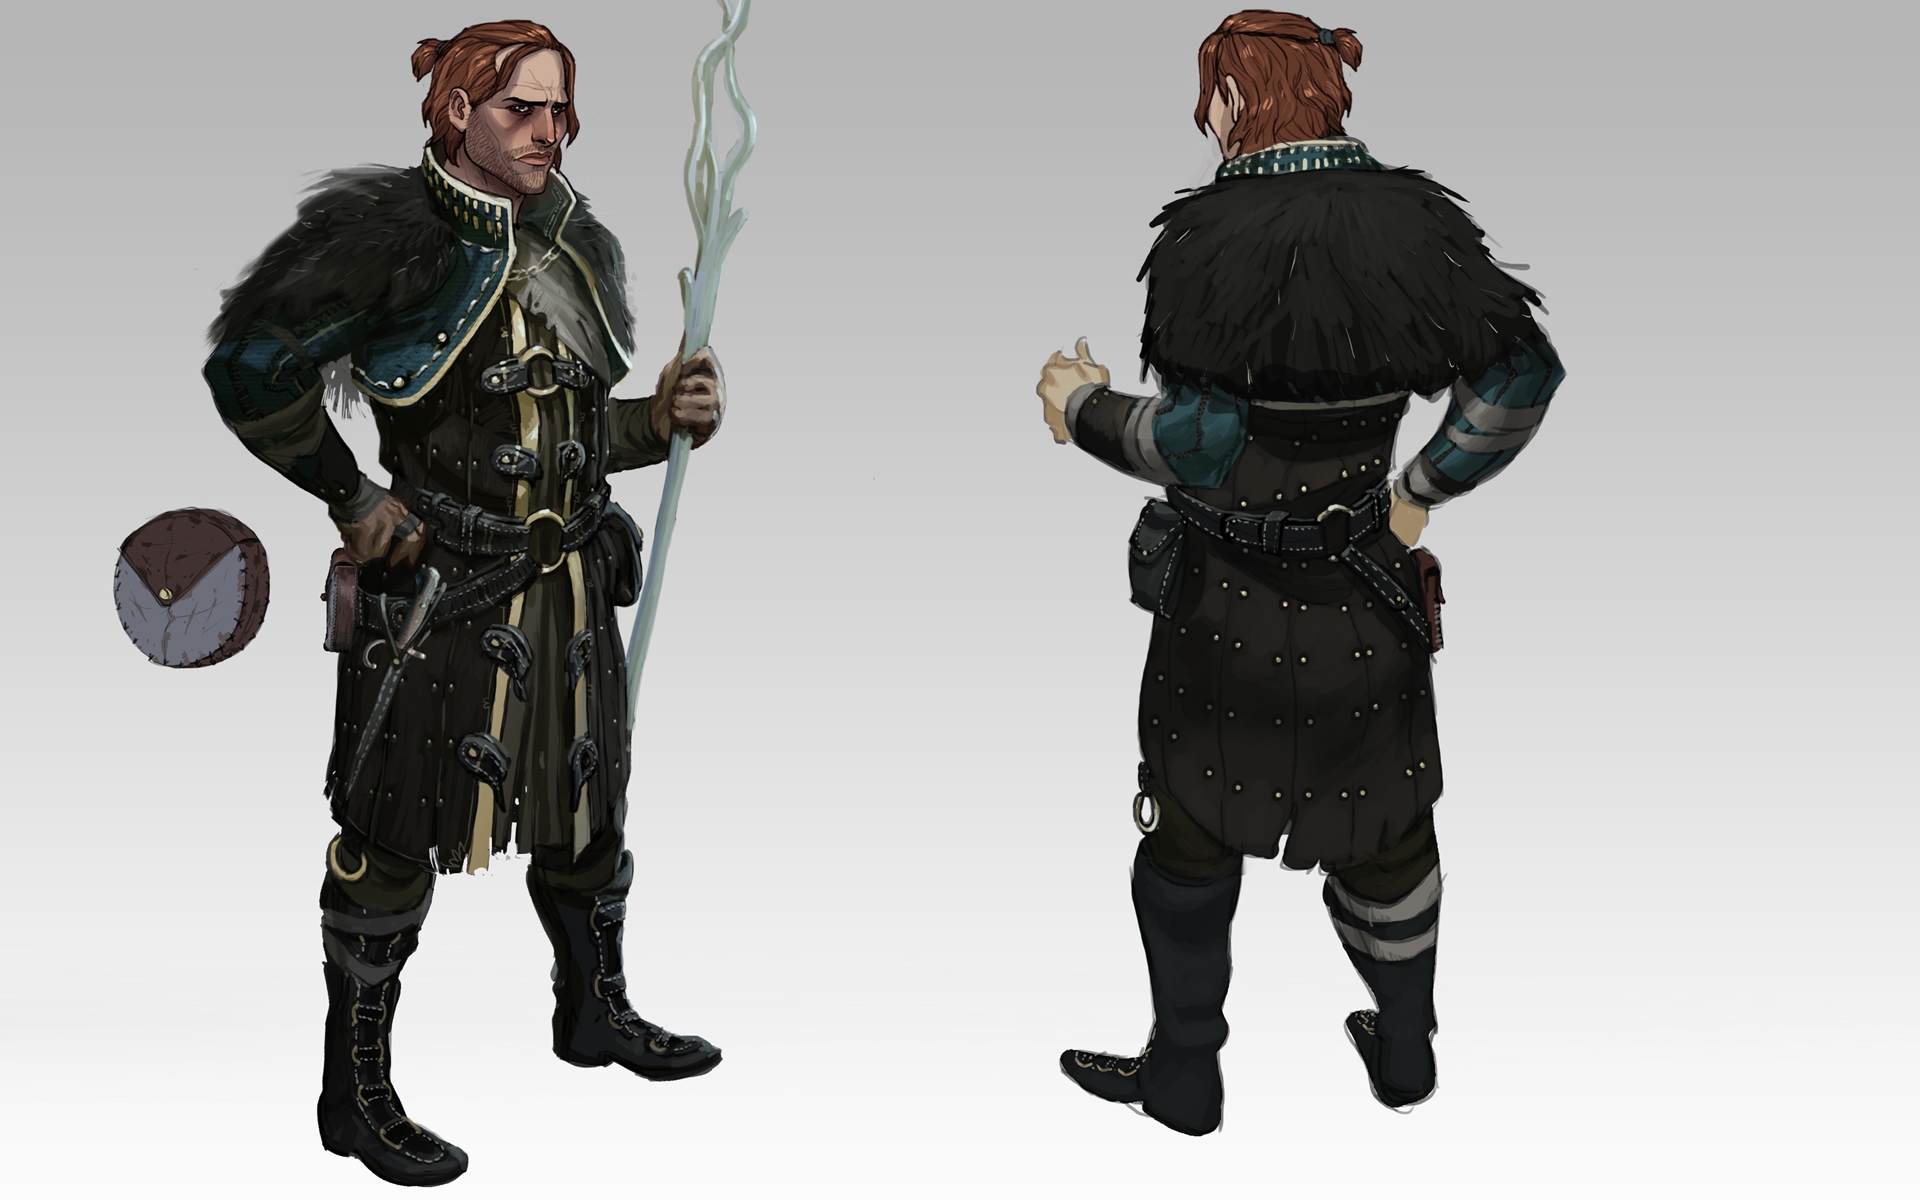 Dragon+age+2+anders+gift